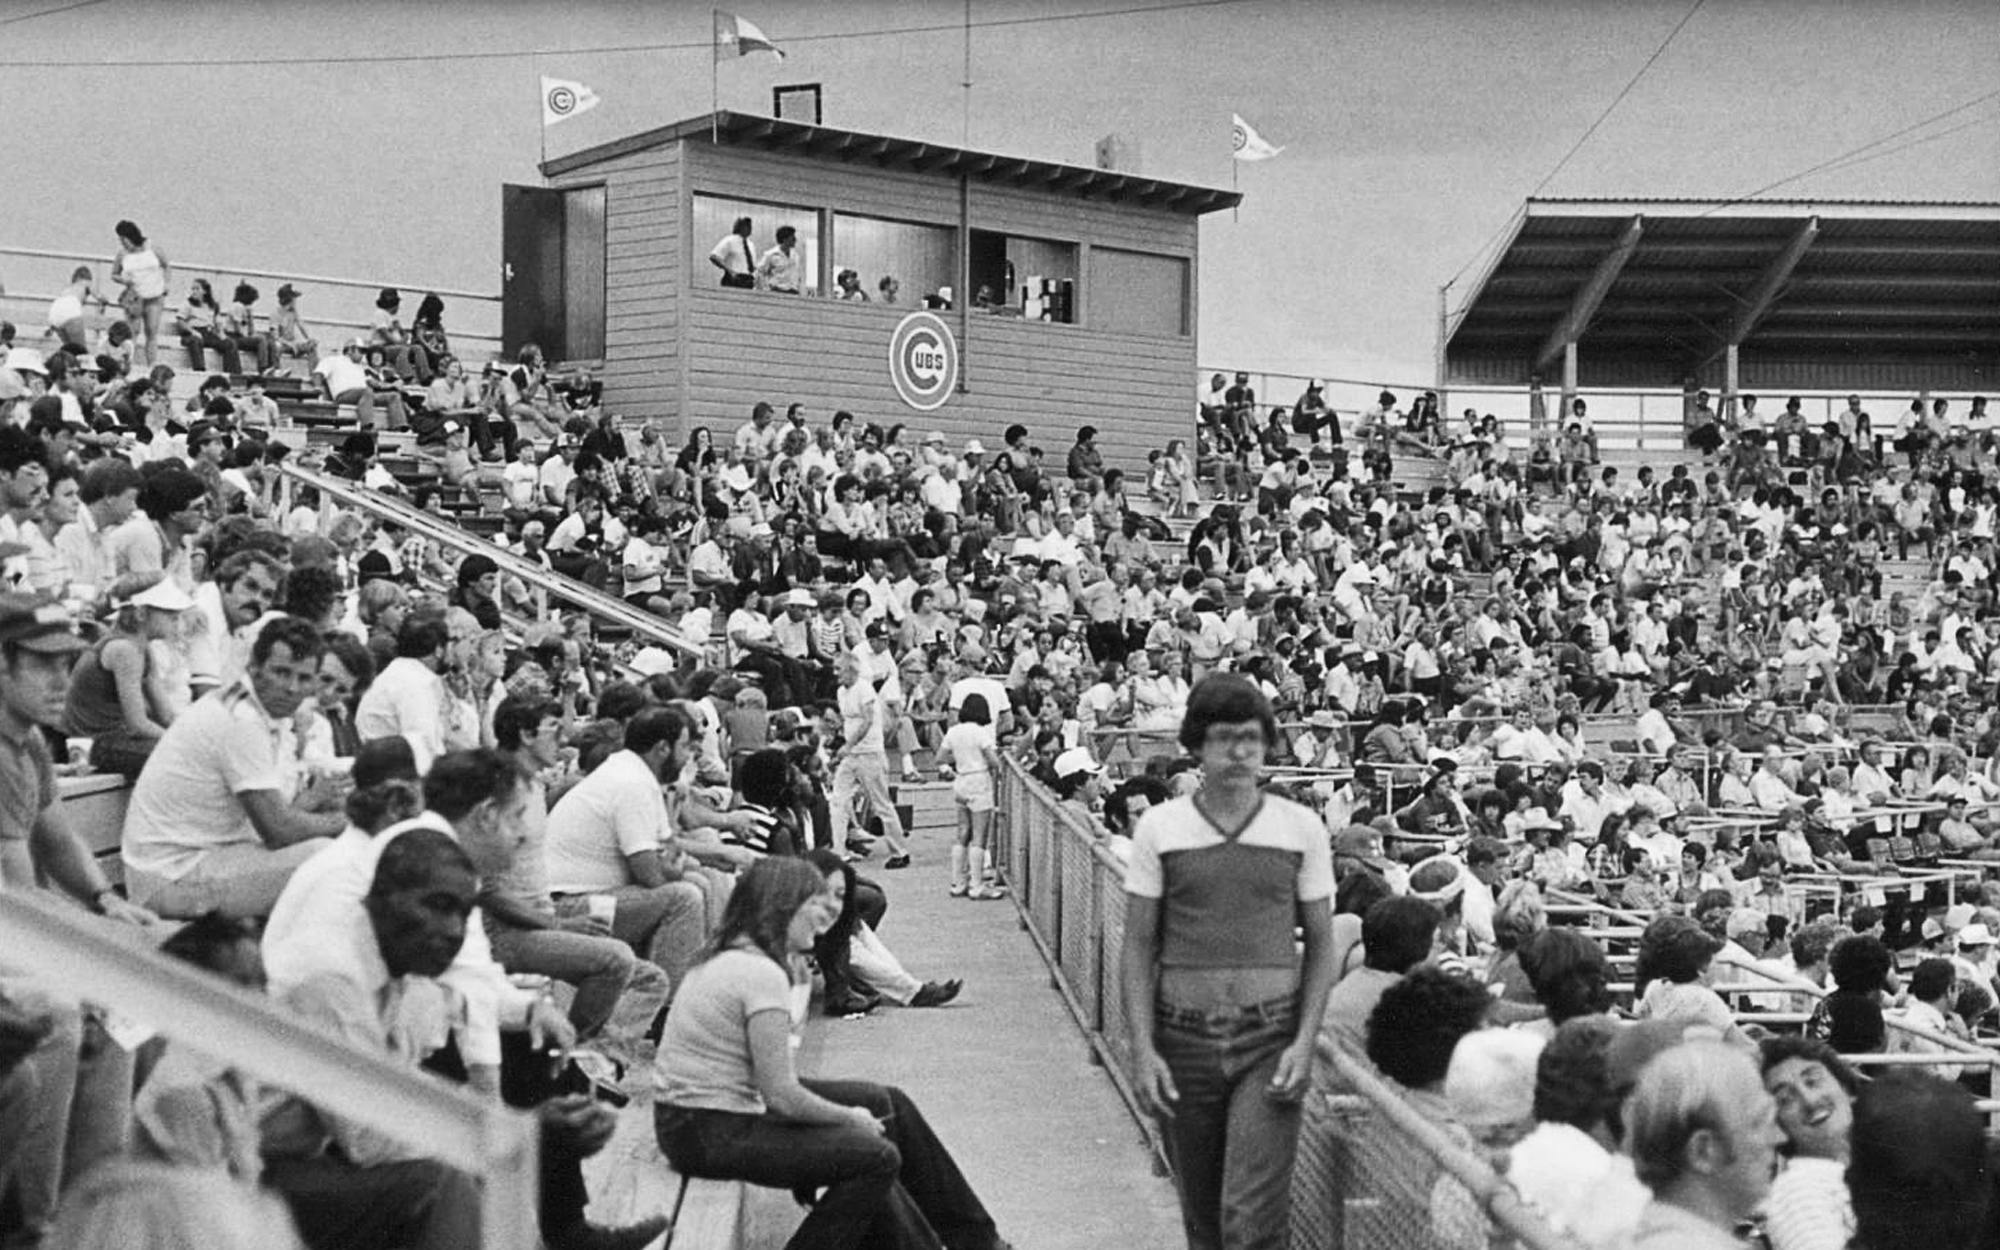 Grasshoppers cancel baseball game in Midland in 1972